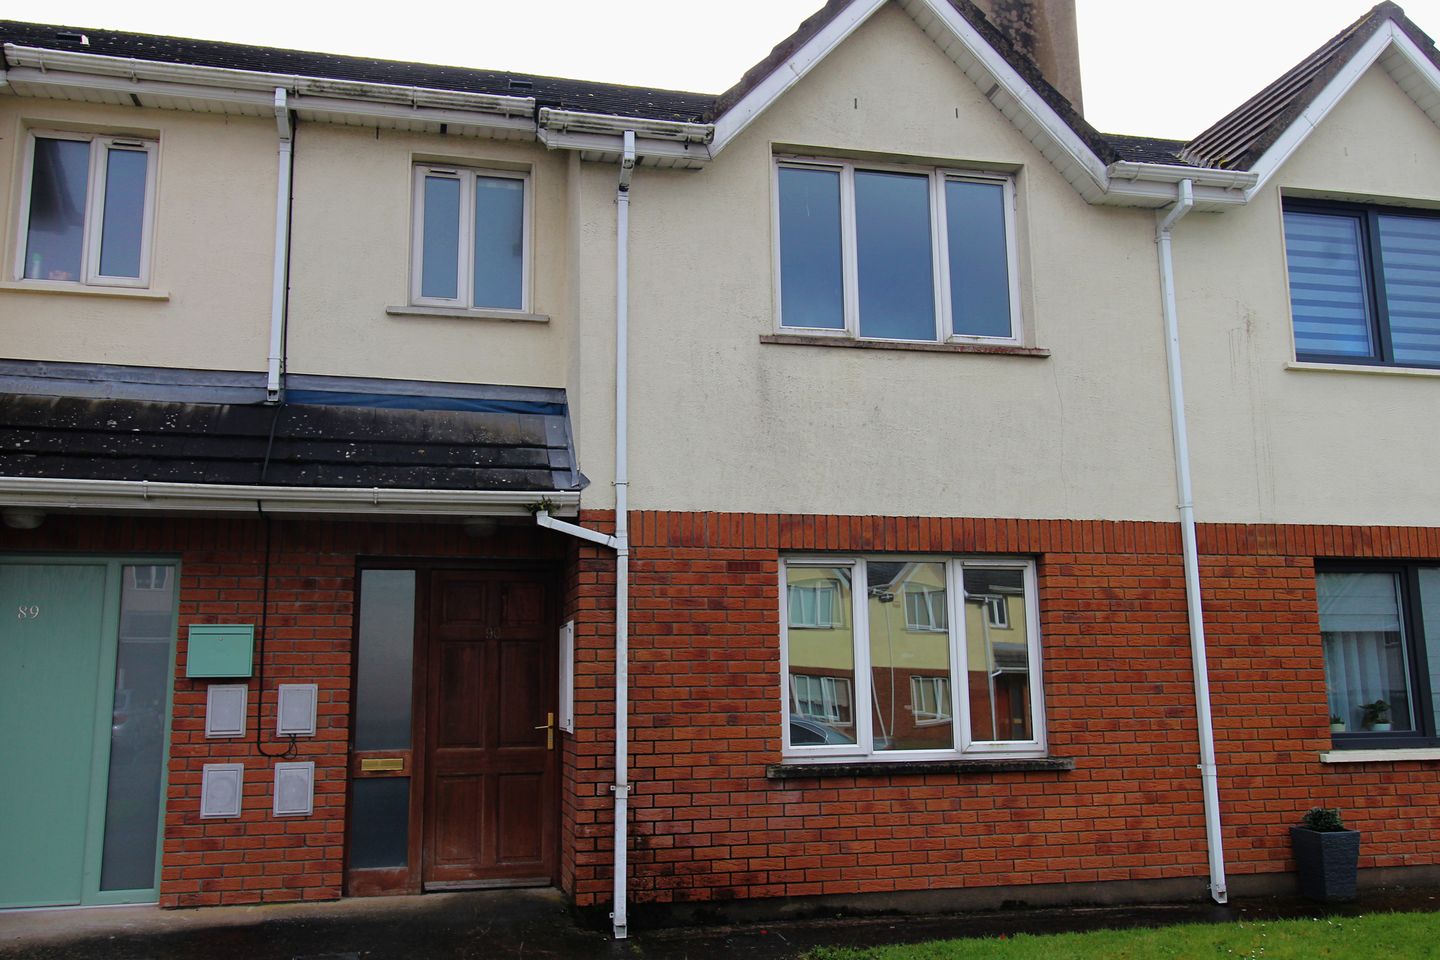 90 Town Court, Dungarvan, Co. Waterford, X35TP40